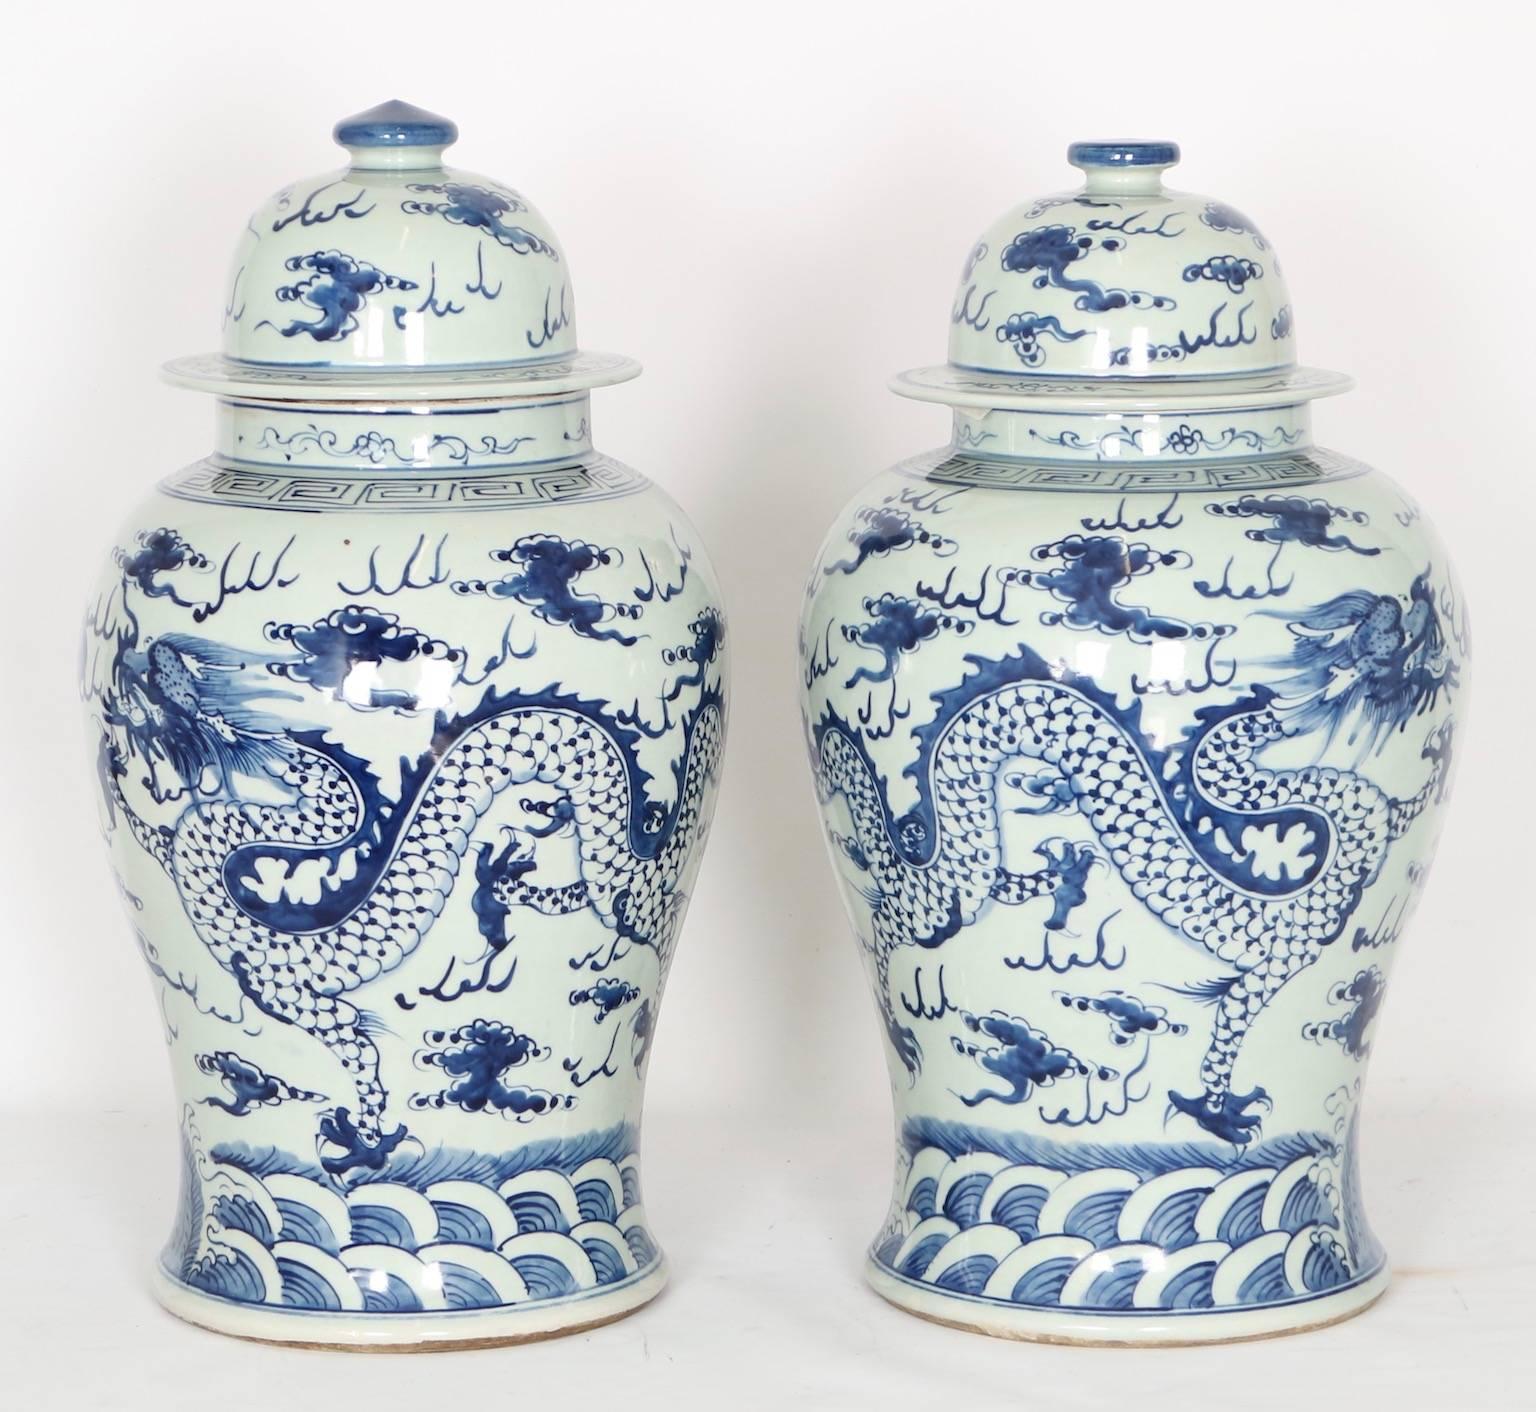 20th Century Chinese Export Ginger Jars in Blue and White